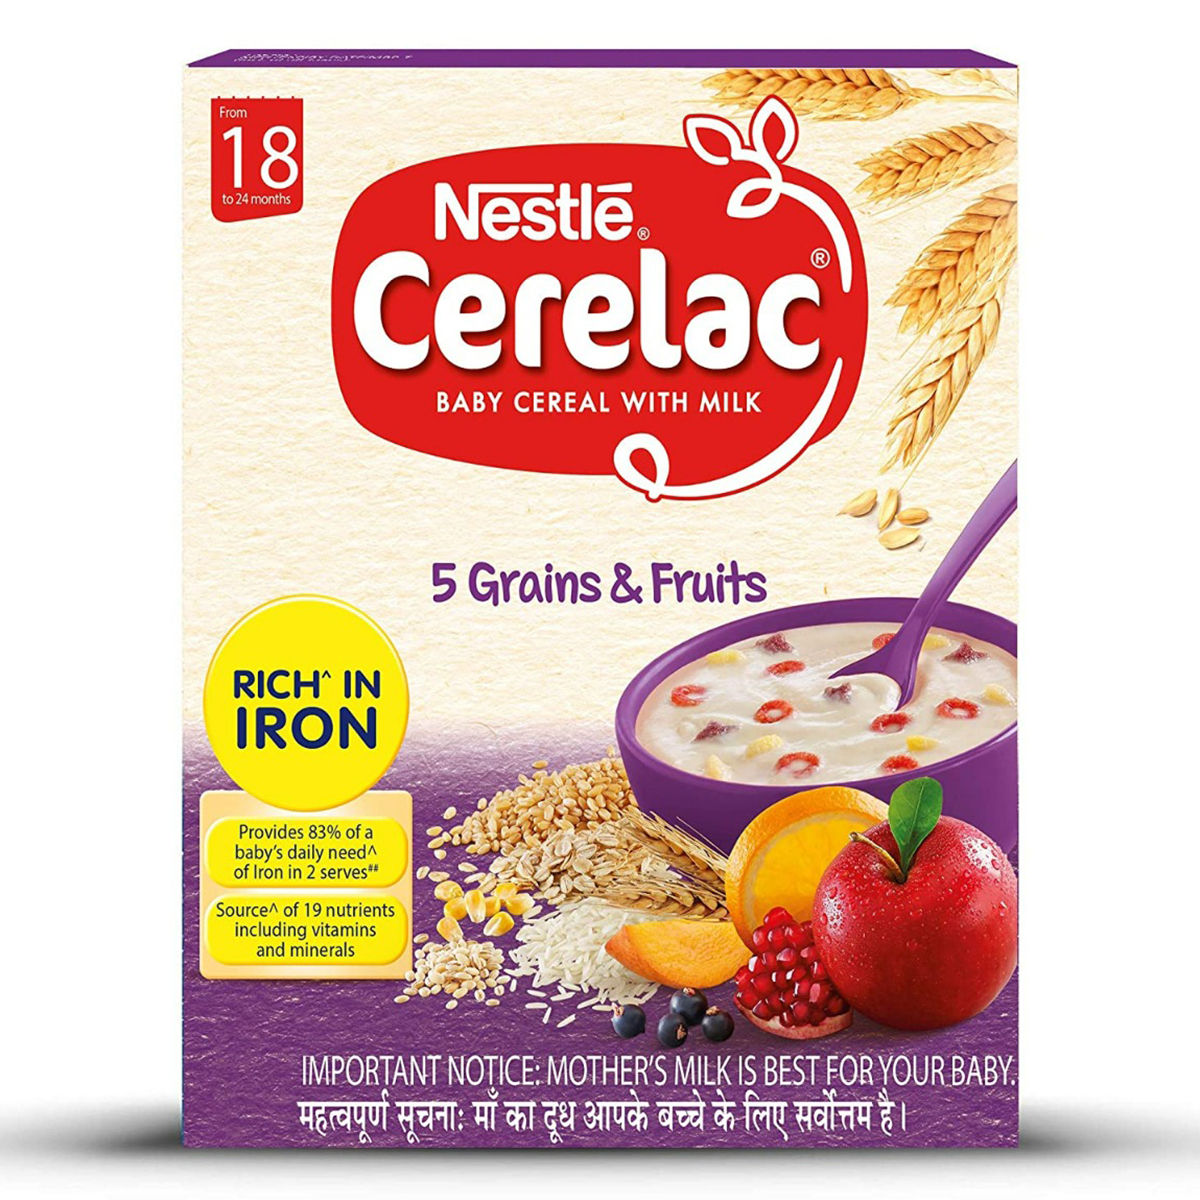 Buy Nestle Cerelac Baby Cereal with Milk Wheat 5 Grains & Fruits Powder, 300 gm Refill Pack Online